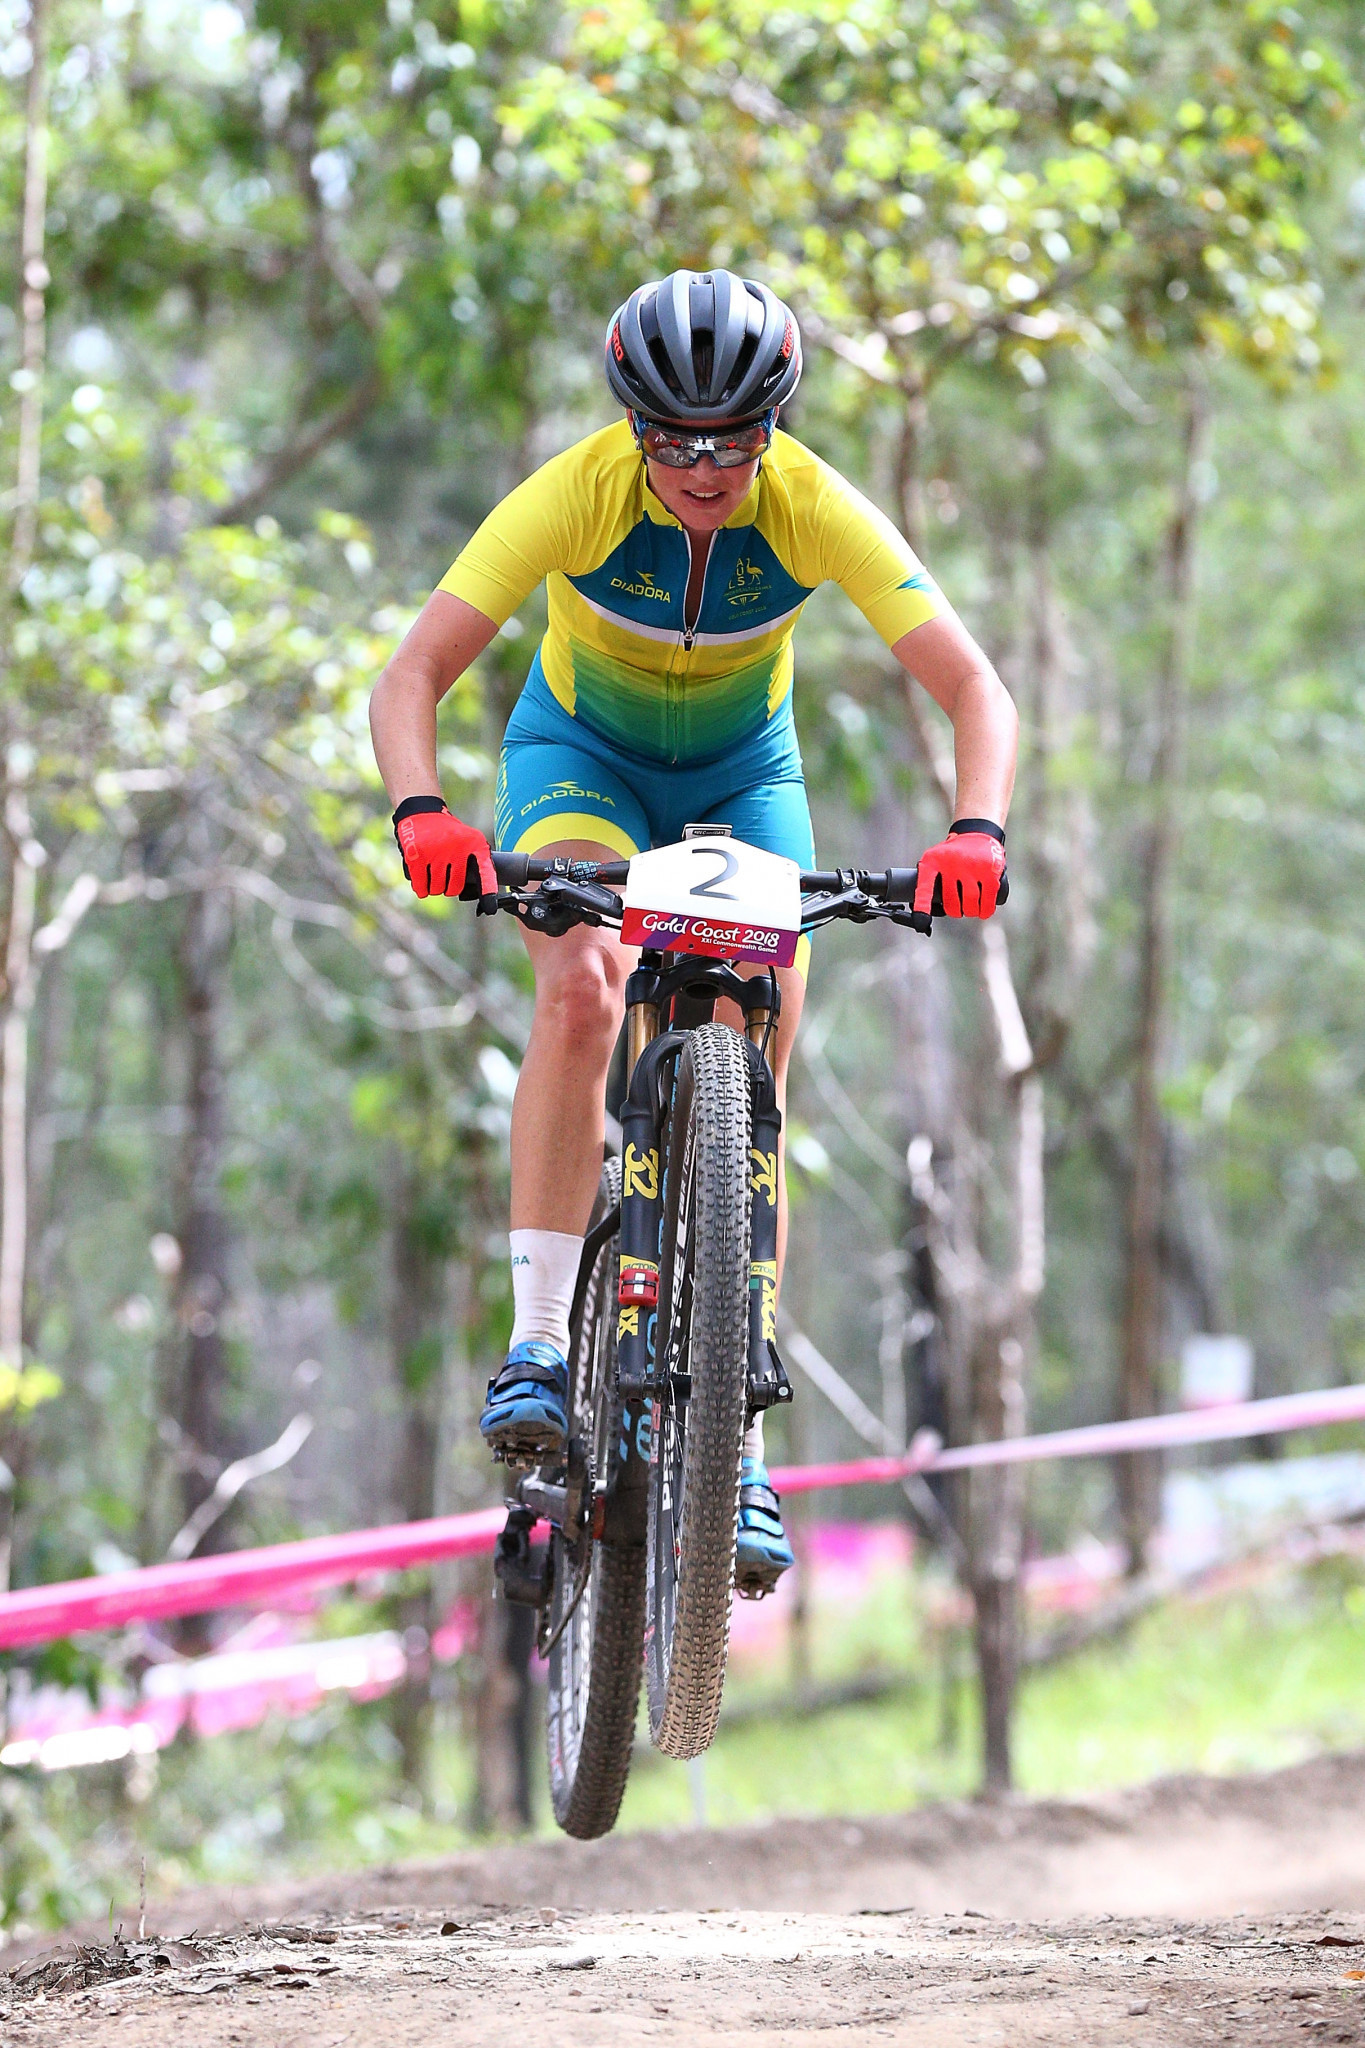 Australia's Rebecca McConnell won a third women's cross-country title at the Oceania Mountain Bike Championships in Bright, team-mate Holly Harris, who finished second for the third year in a row ©Getty Images